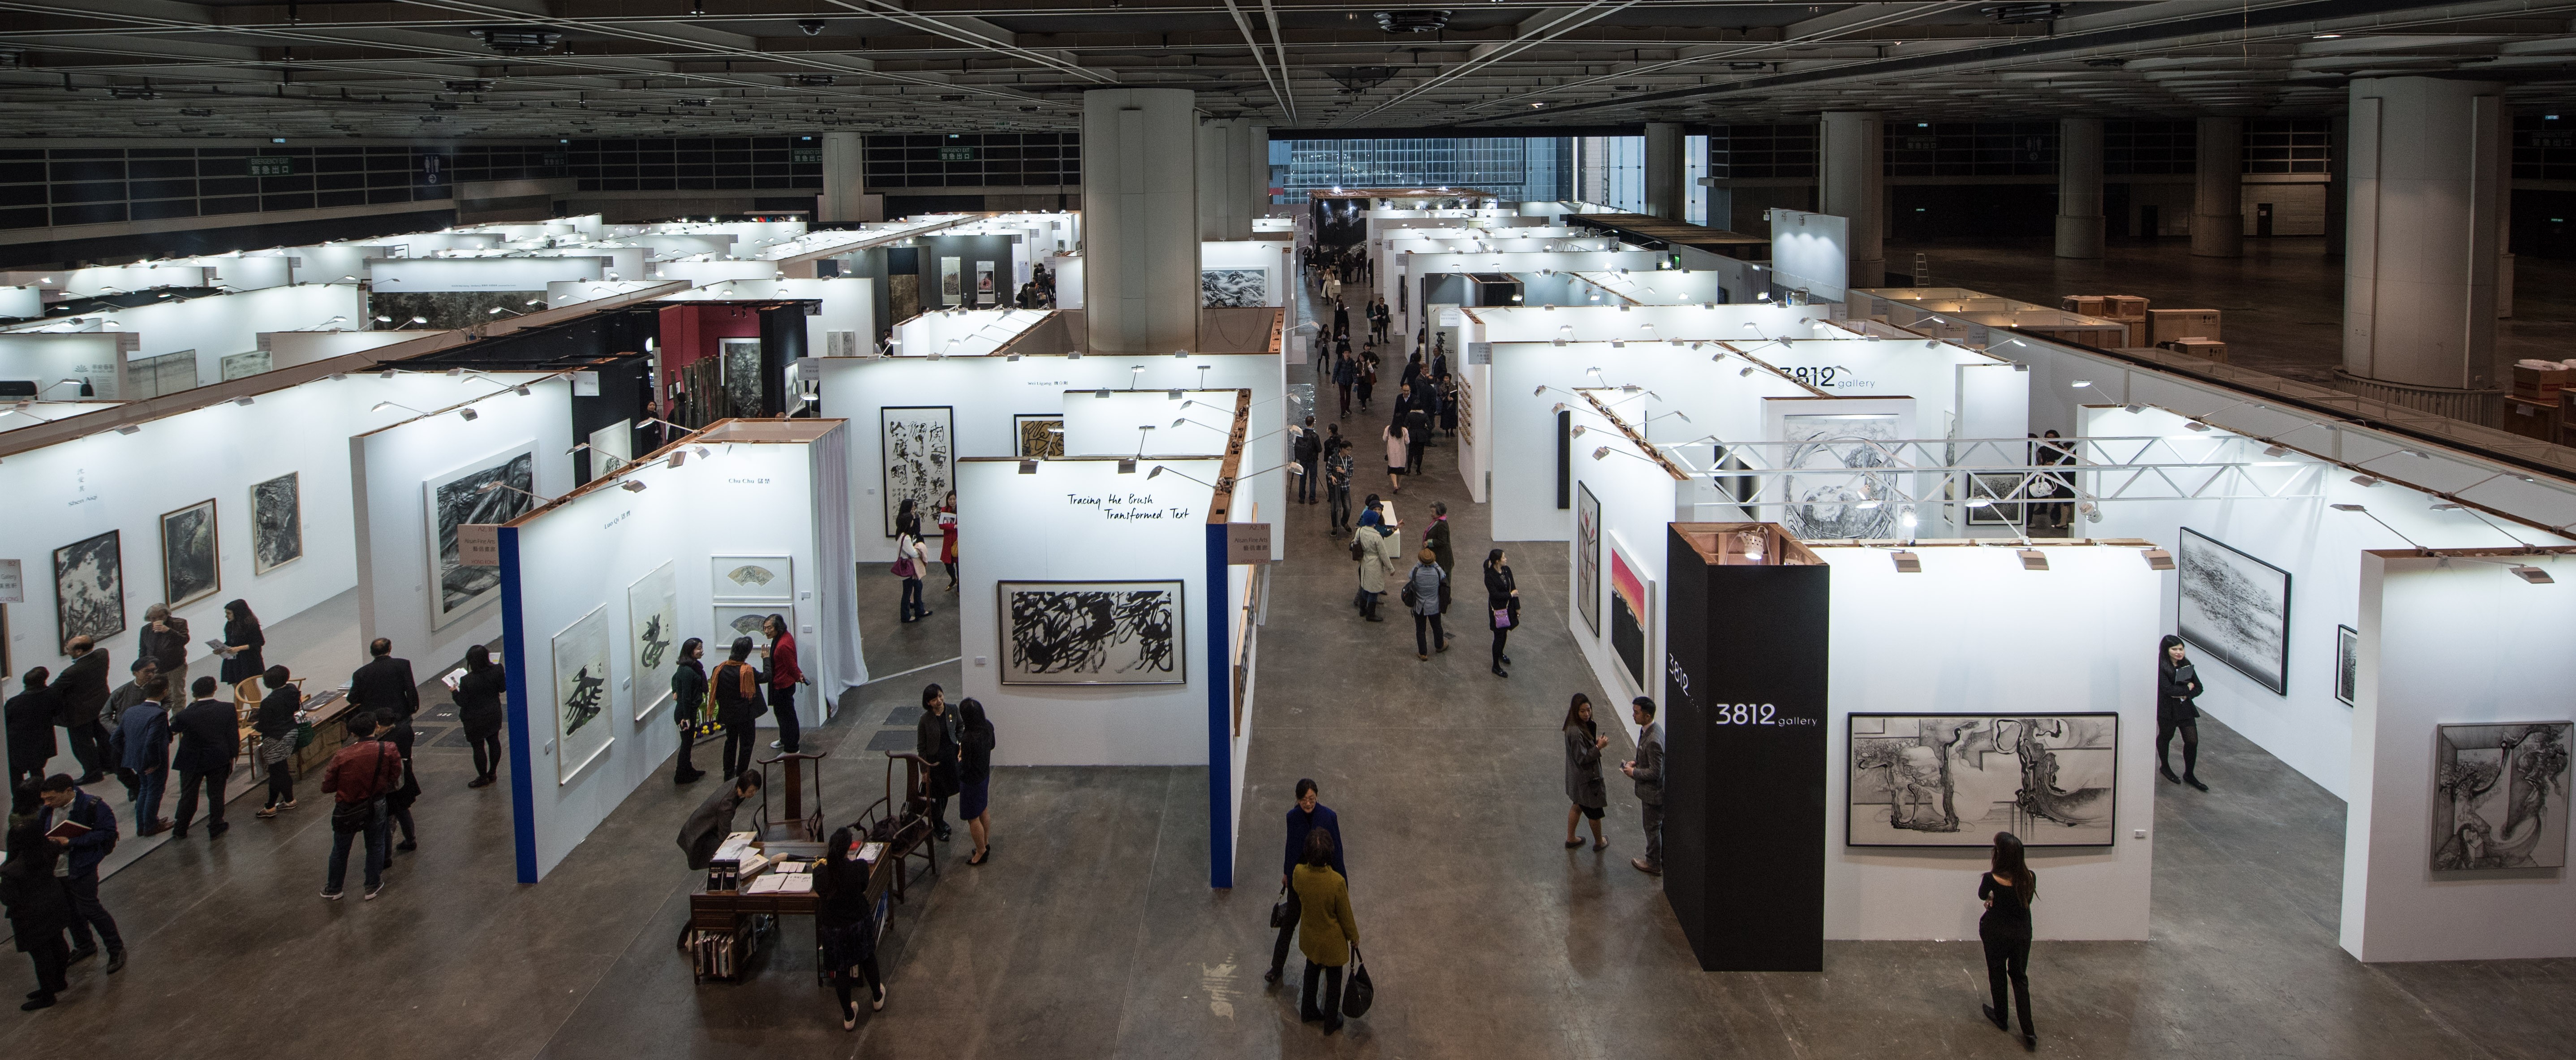 The trade war took its toll on the Chinese art market last year, insiders say. Photo: Ink Asia